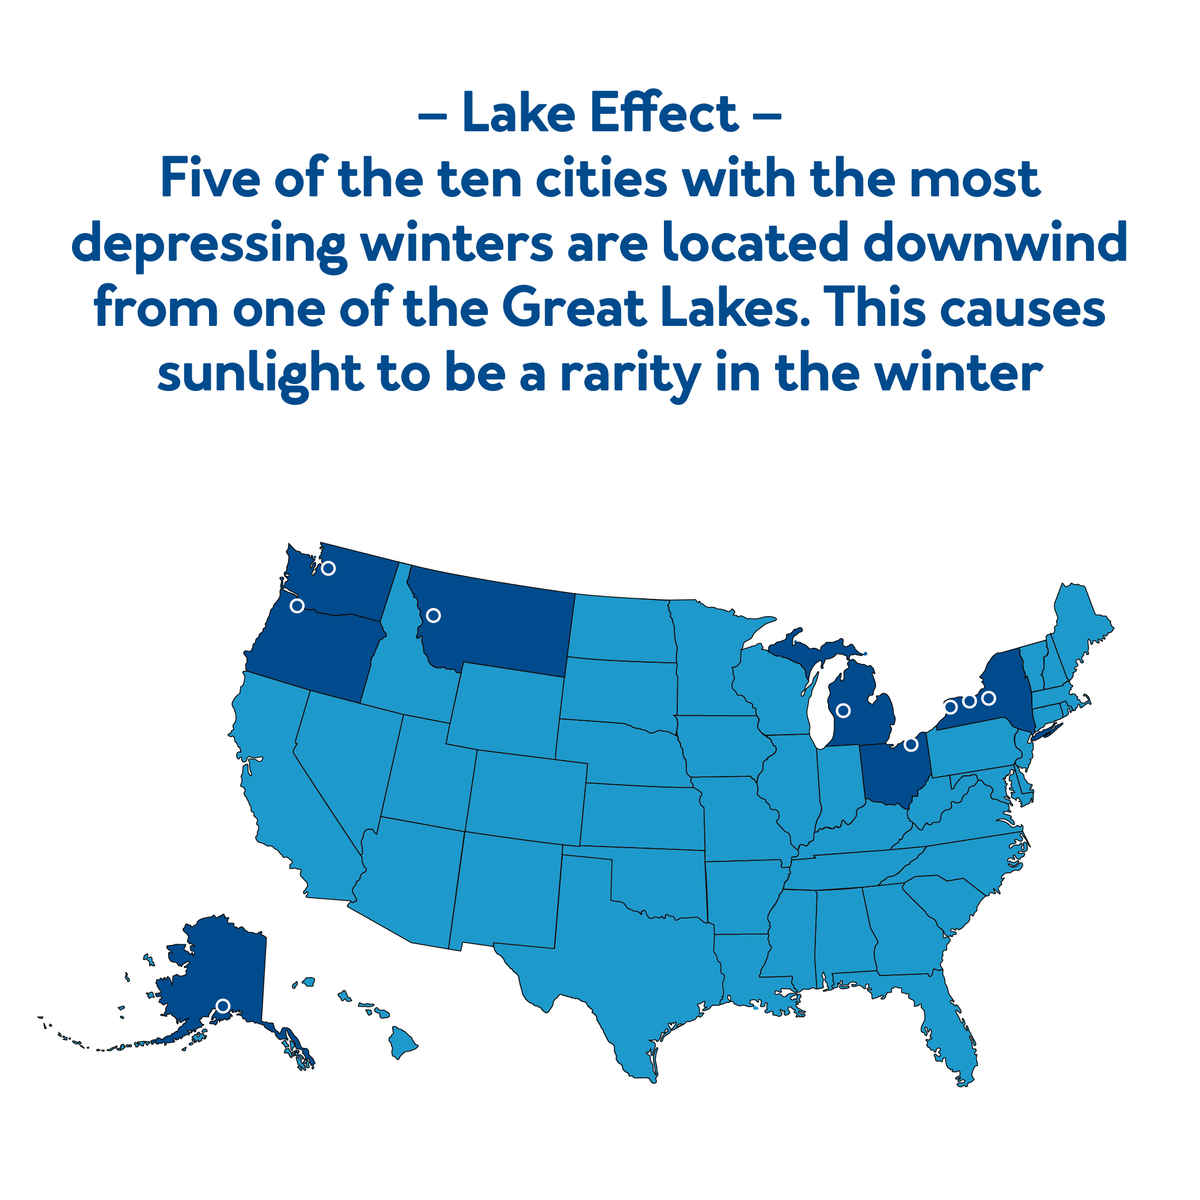 Lake Effect Five of the ten states with the most depressing winters are located  : Further details are provided below